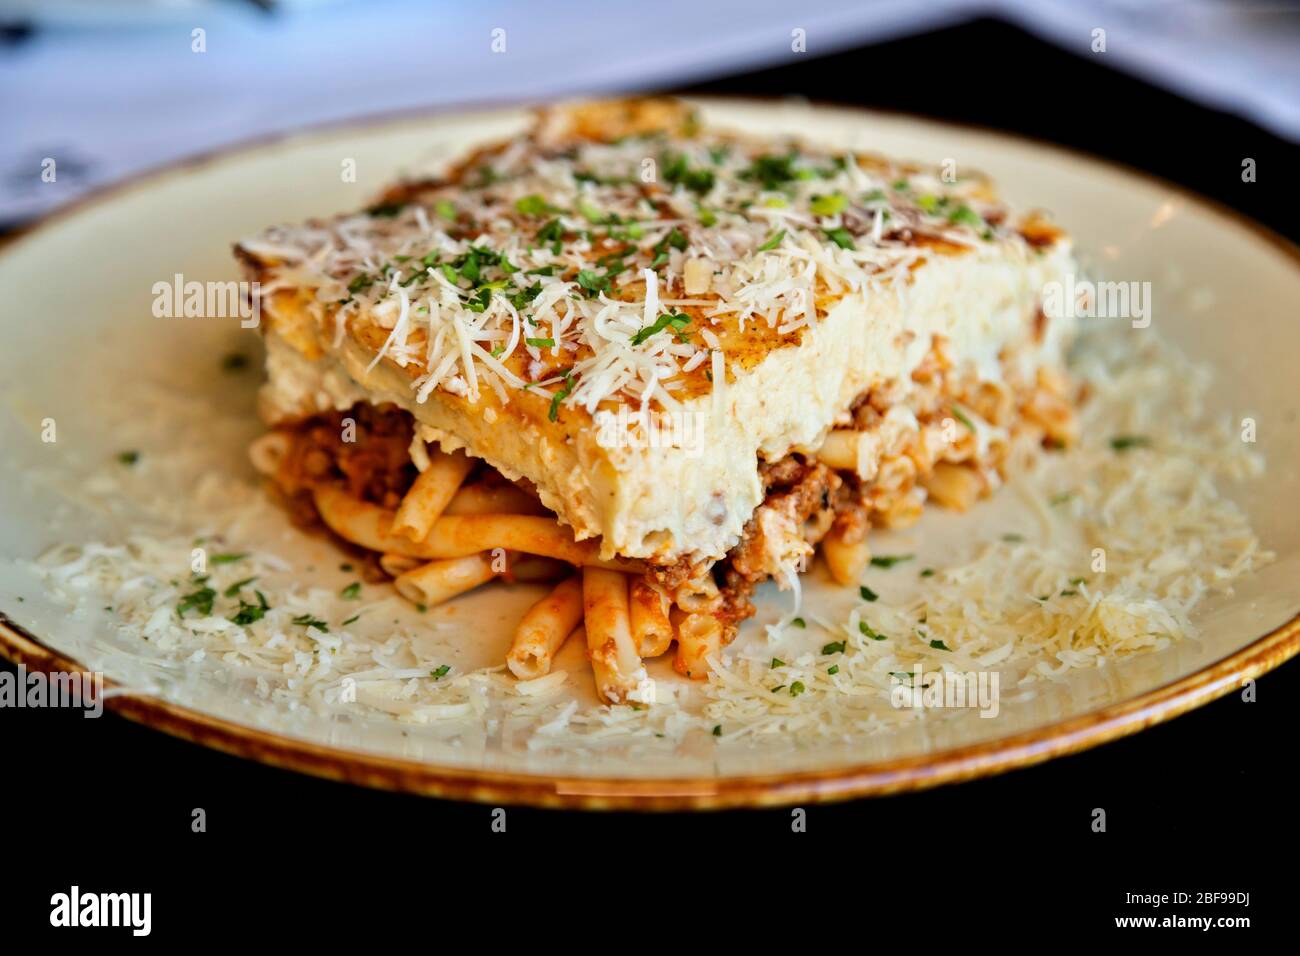 Pastitsio (or Pastichio, is a Greek baked pasta dish with ground meat and béchamel sauce. Stock Photo